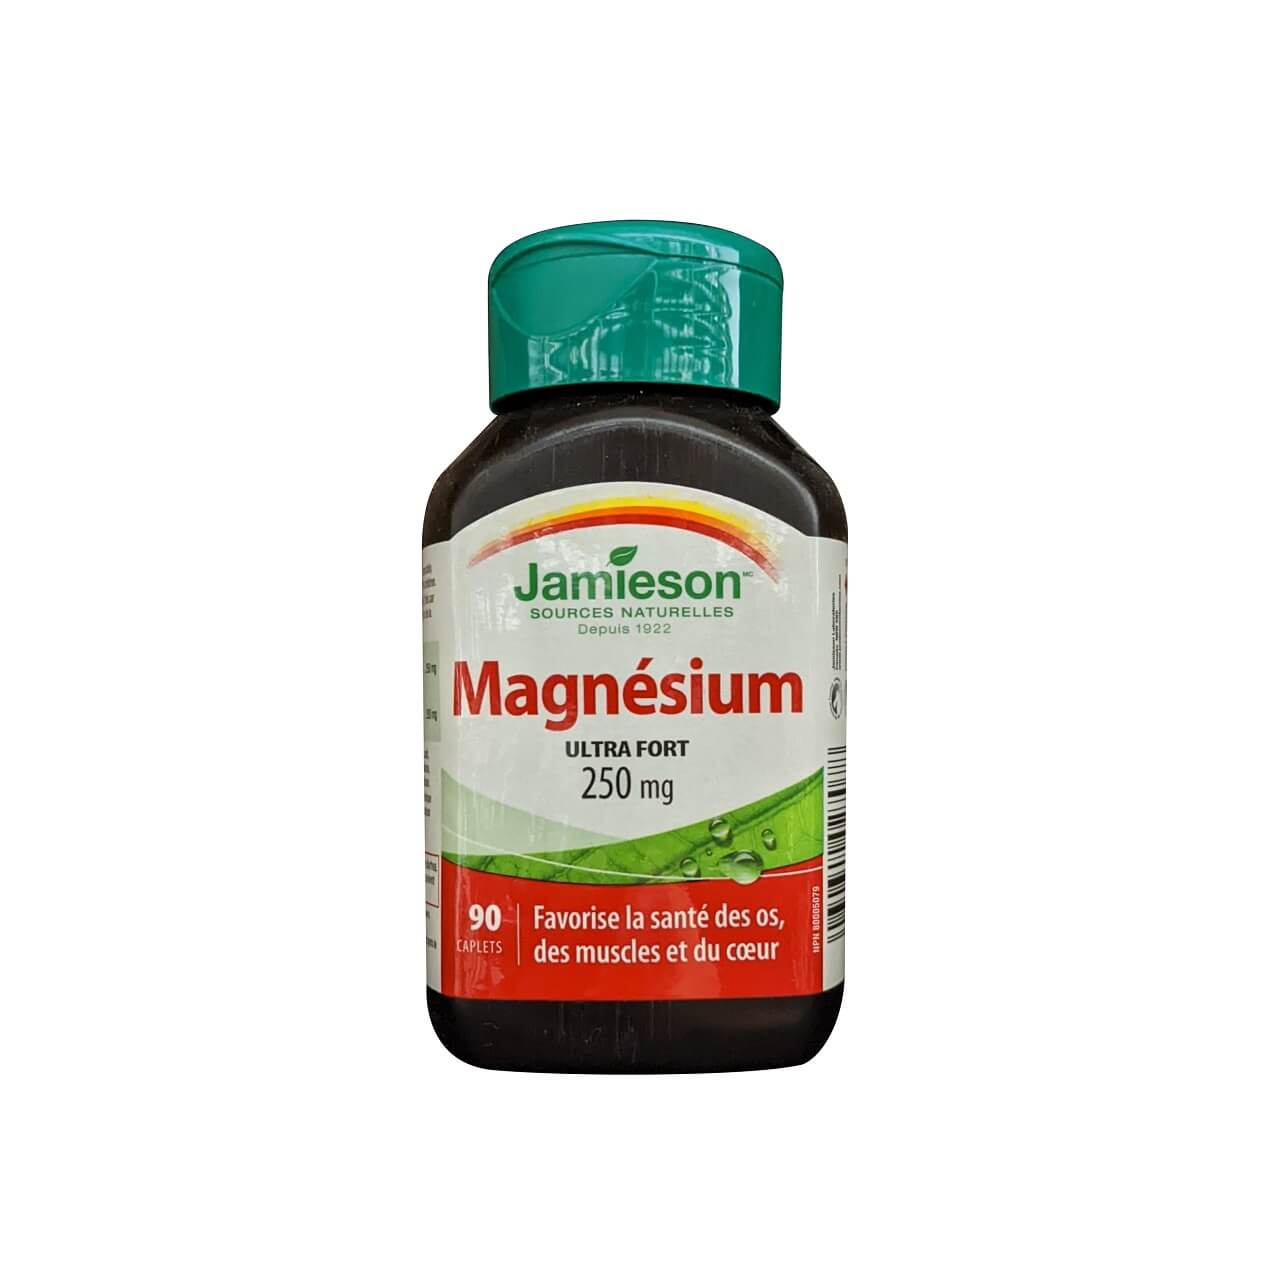 Product label for Jamieson Magnesium 250 mg Ultra Strength (90 caplets) in French